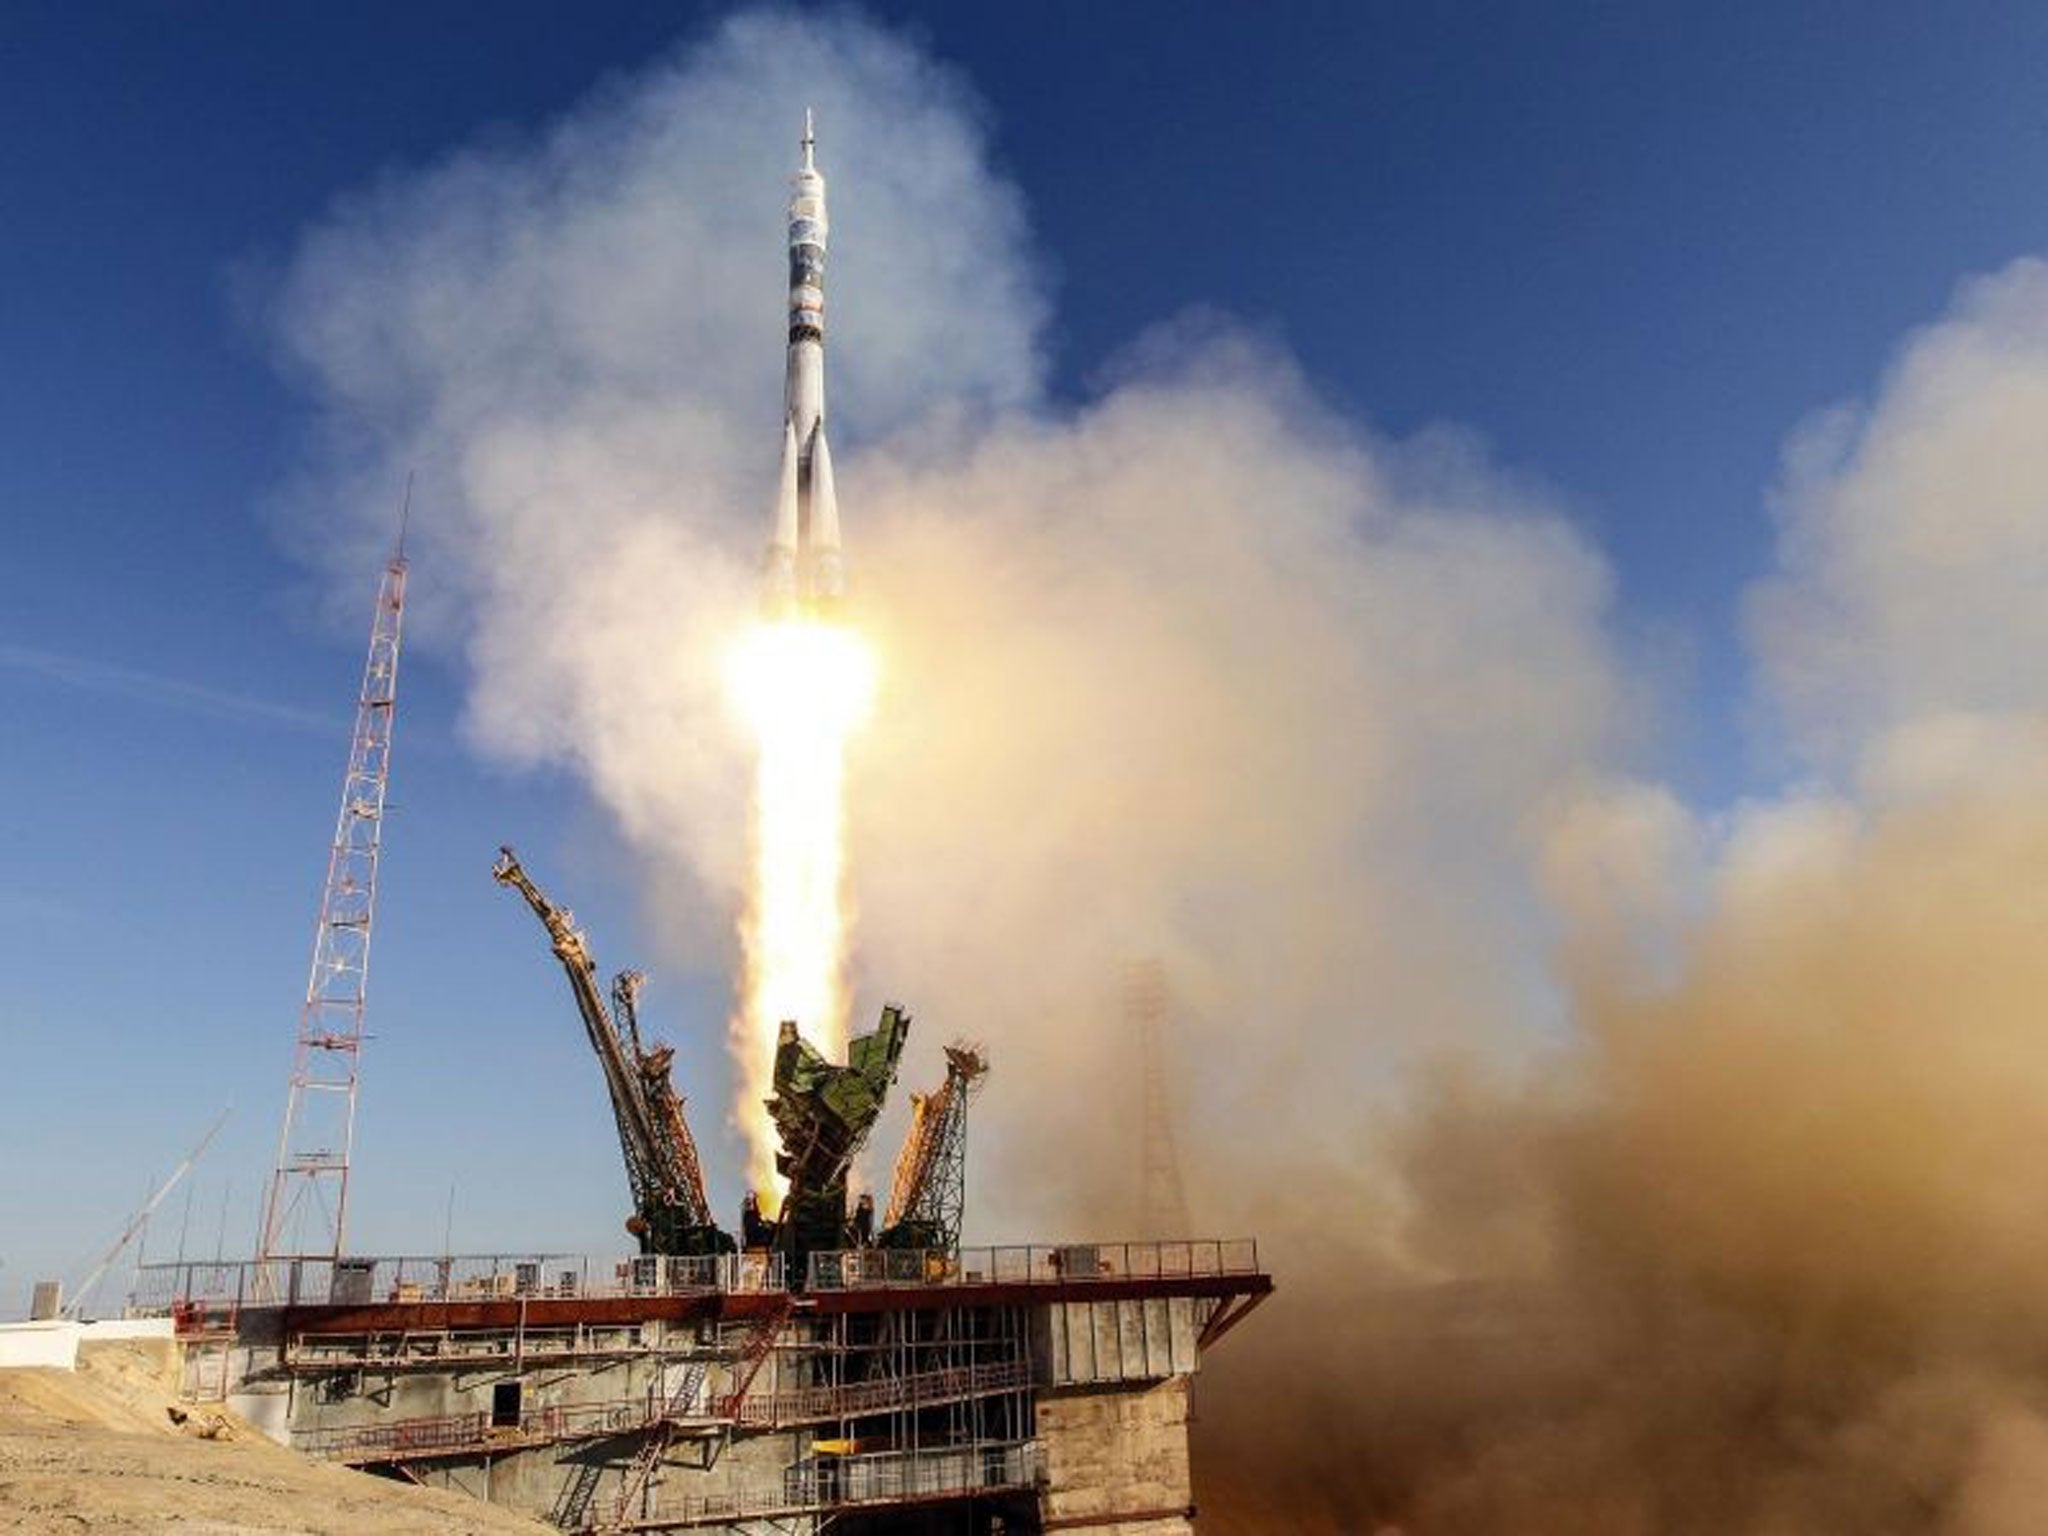 The Soyuz TMA-11M spacecraft decorated with the 2014 Sochi Winter Olympic Games logo and a blue-and-white snowflake pattern, blasts off from the launch pad at the Baikonur cosmodrome